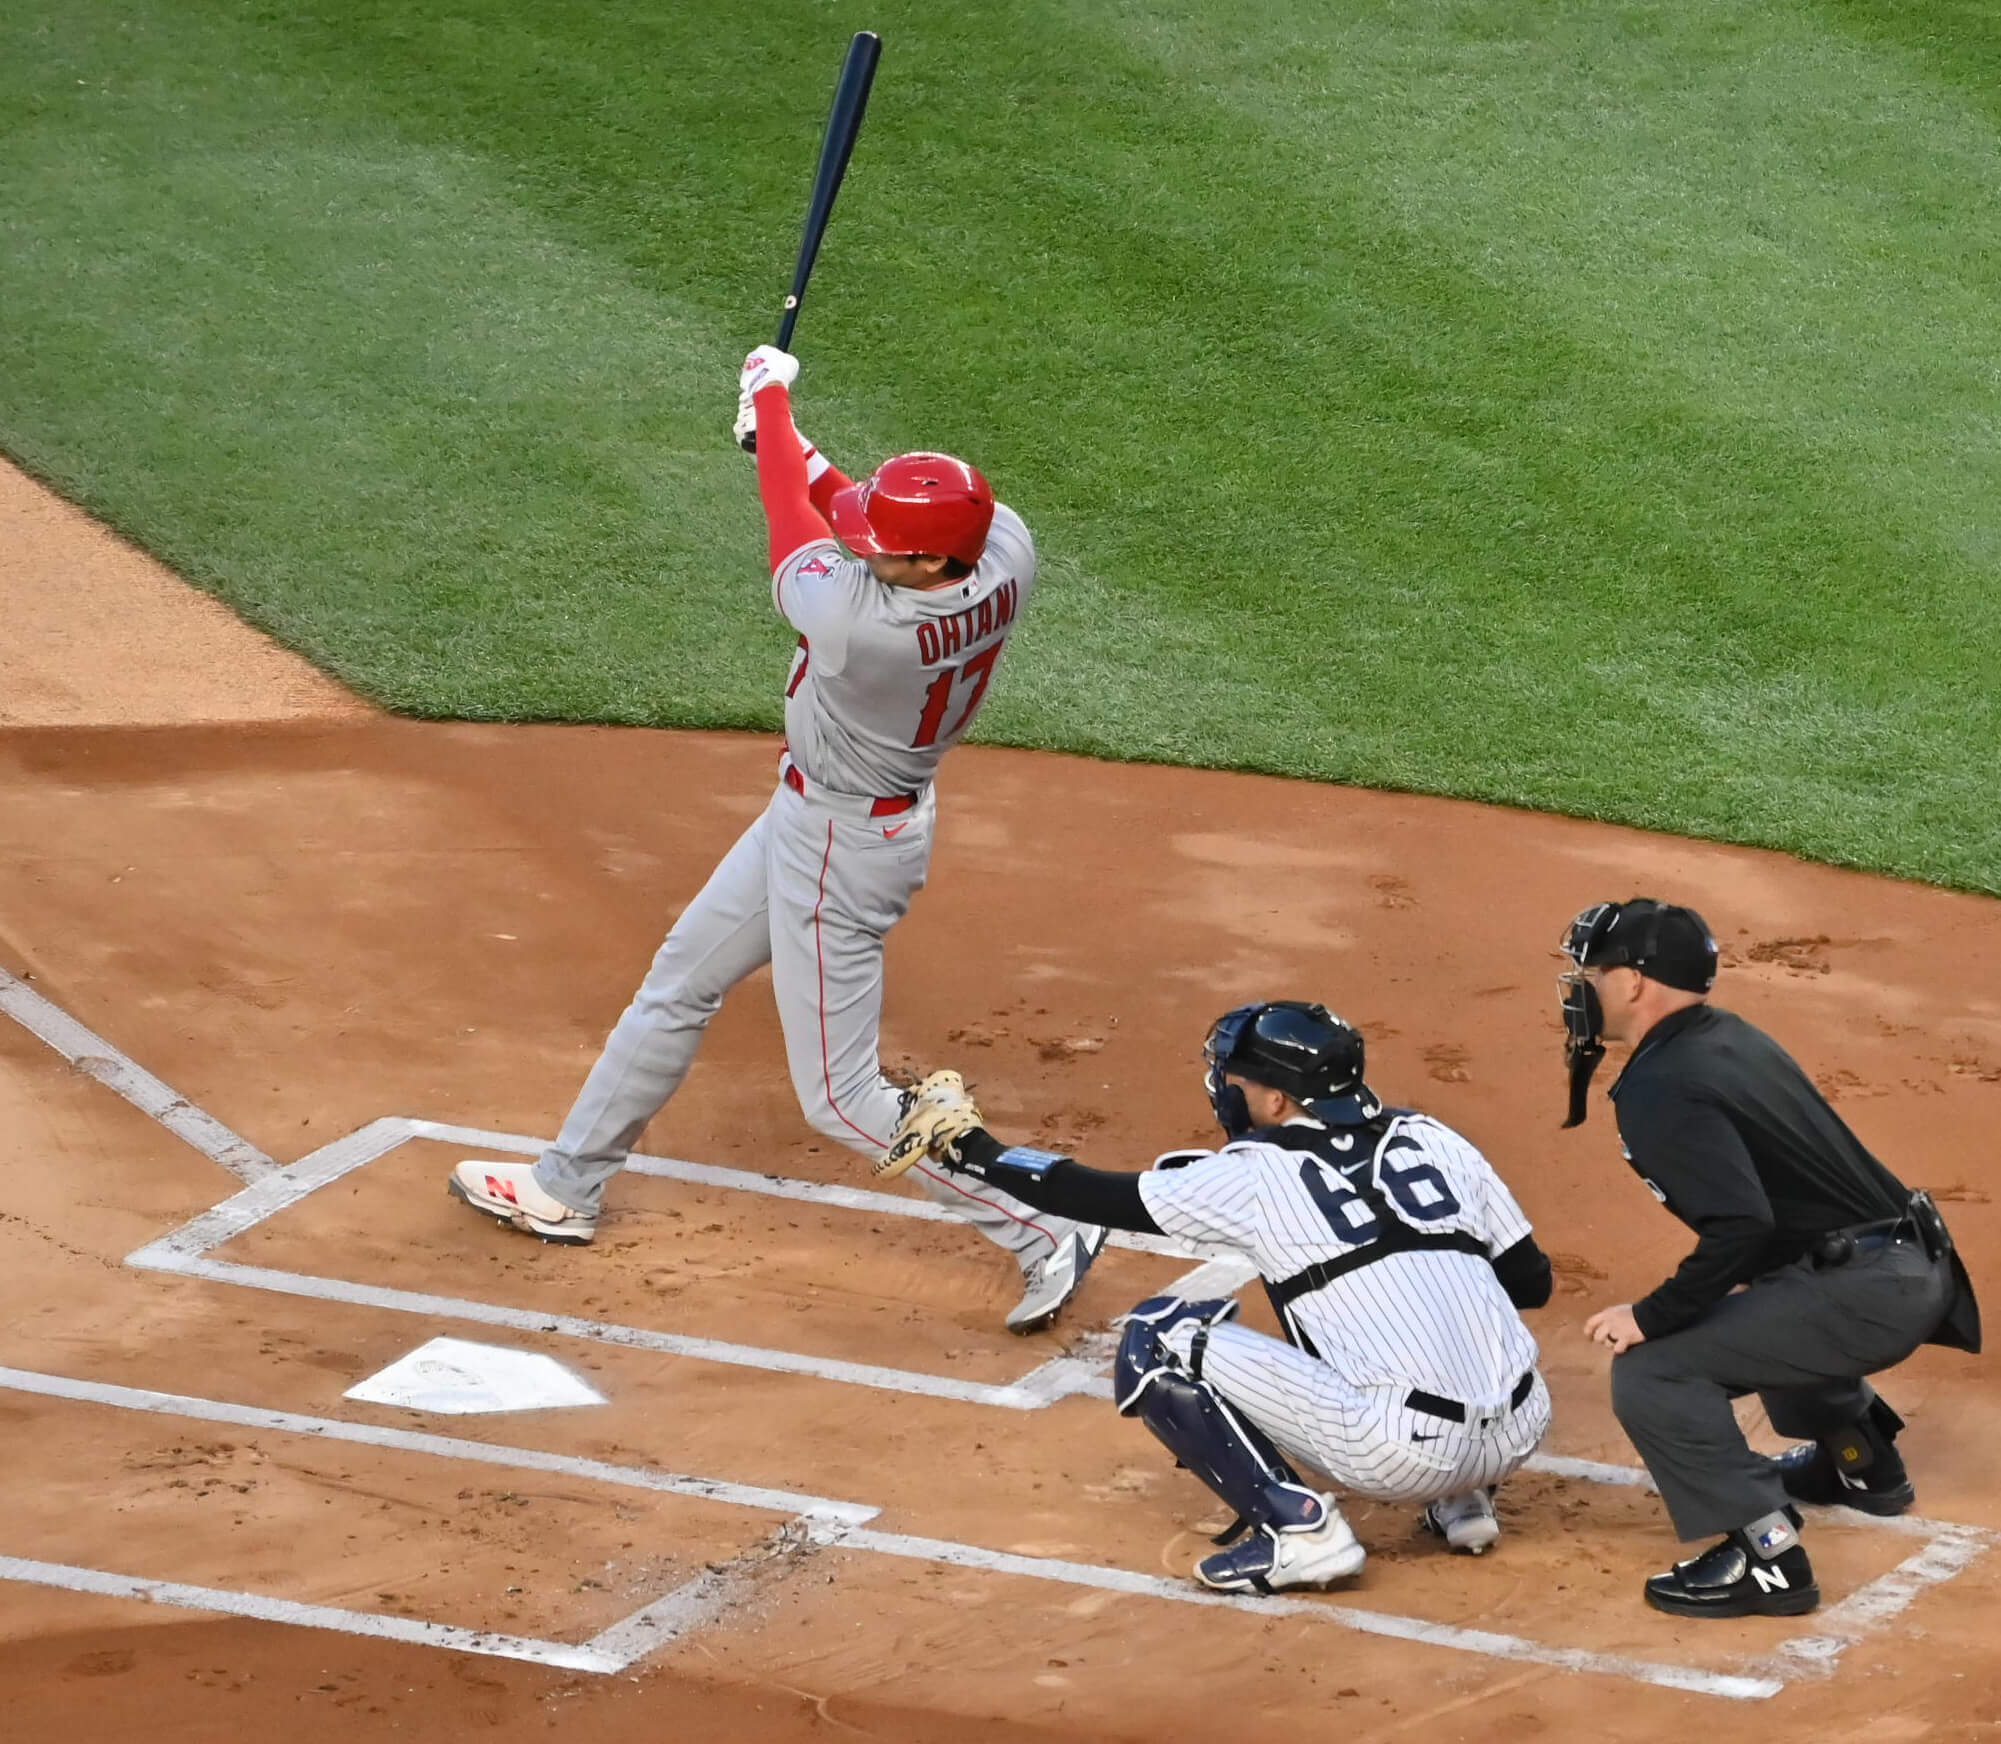 Los Angeles Angels star Shohei Ohtani during an at-bat at Yankee Stadium on April 18, 2023.